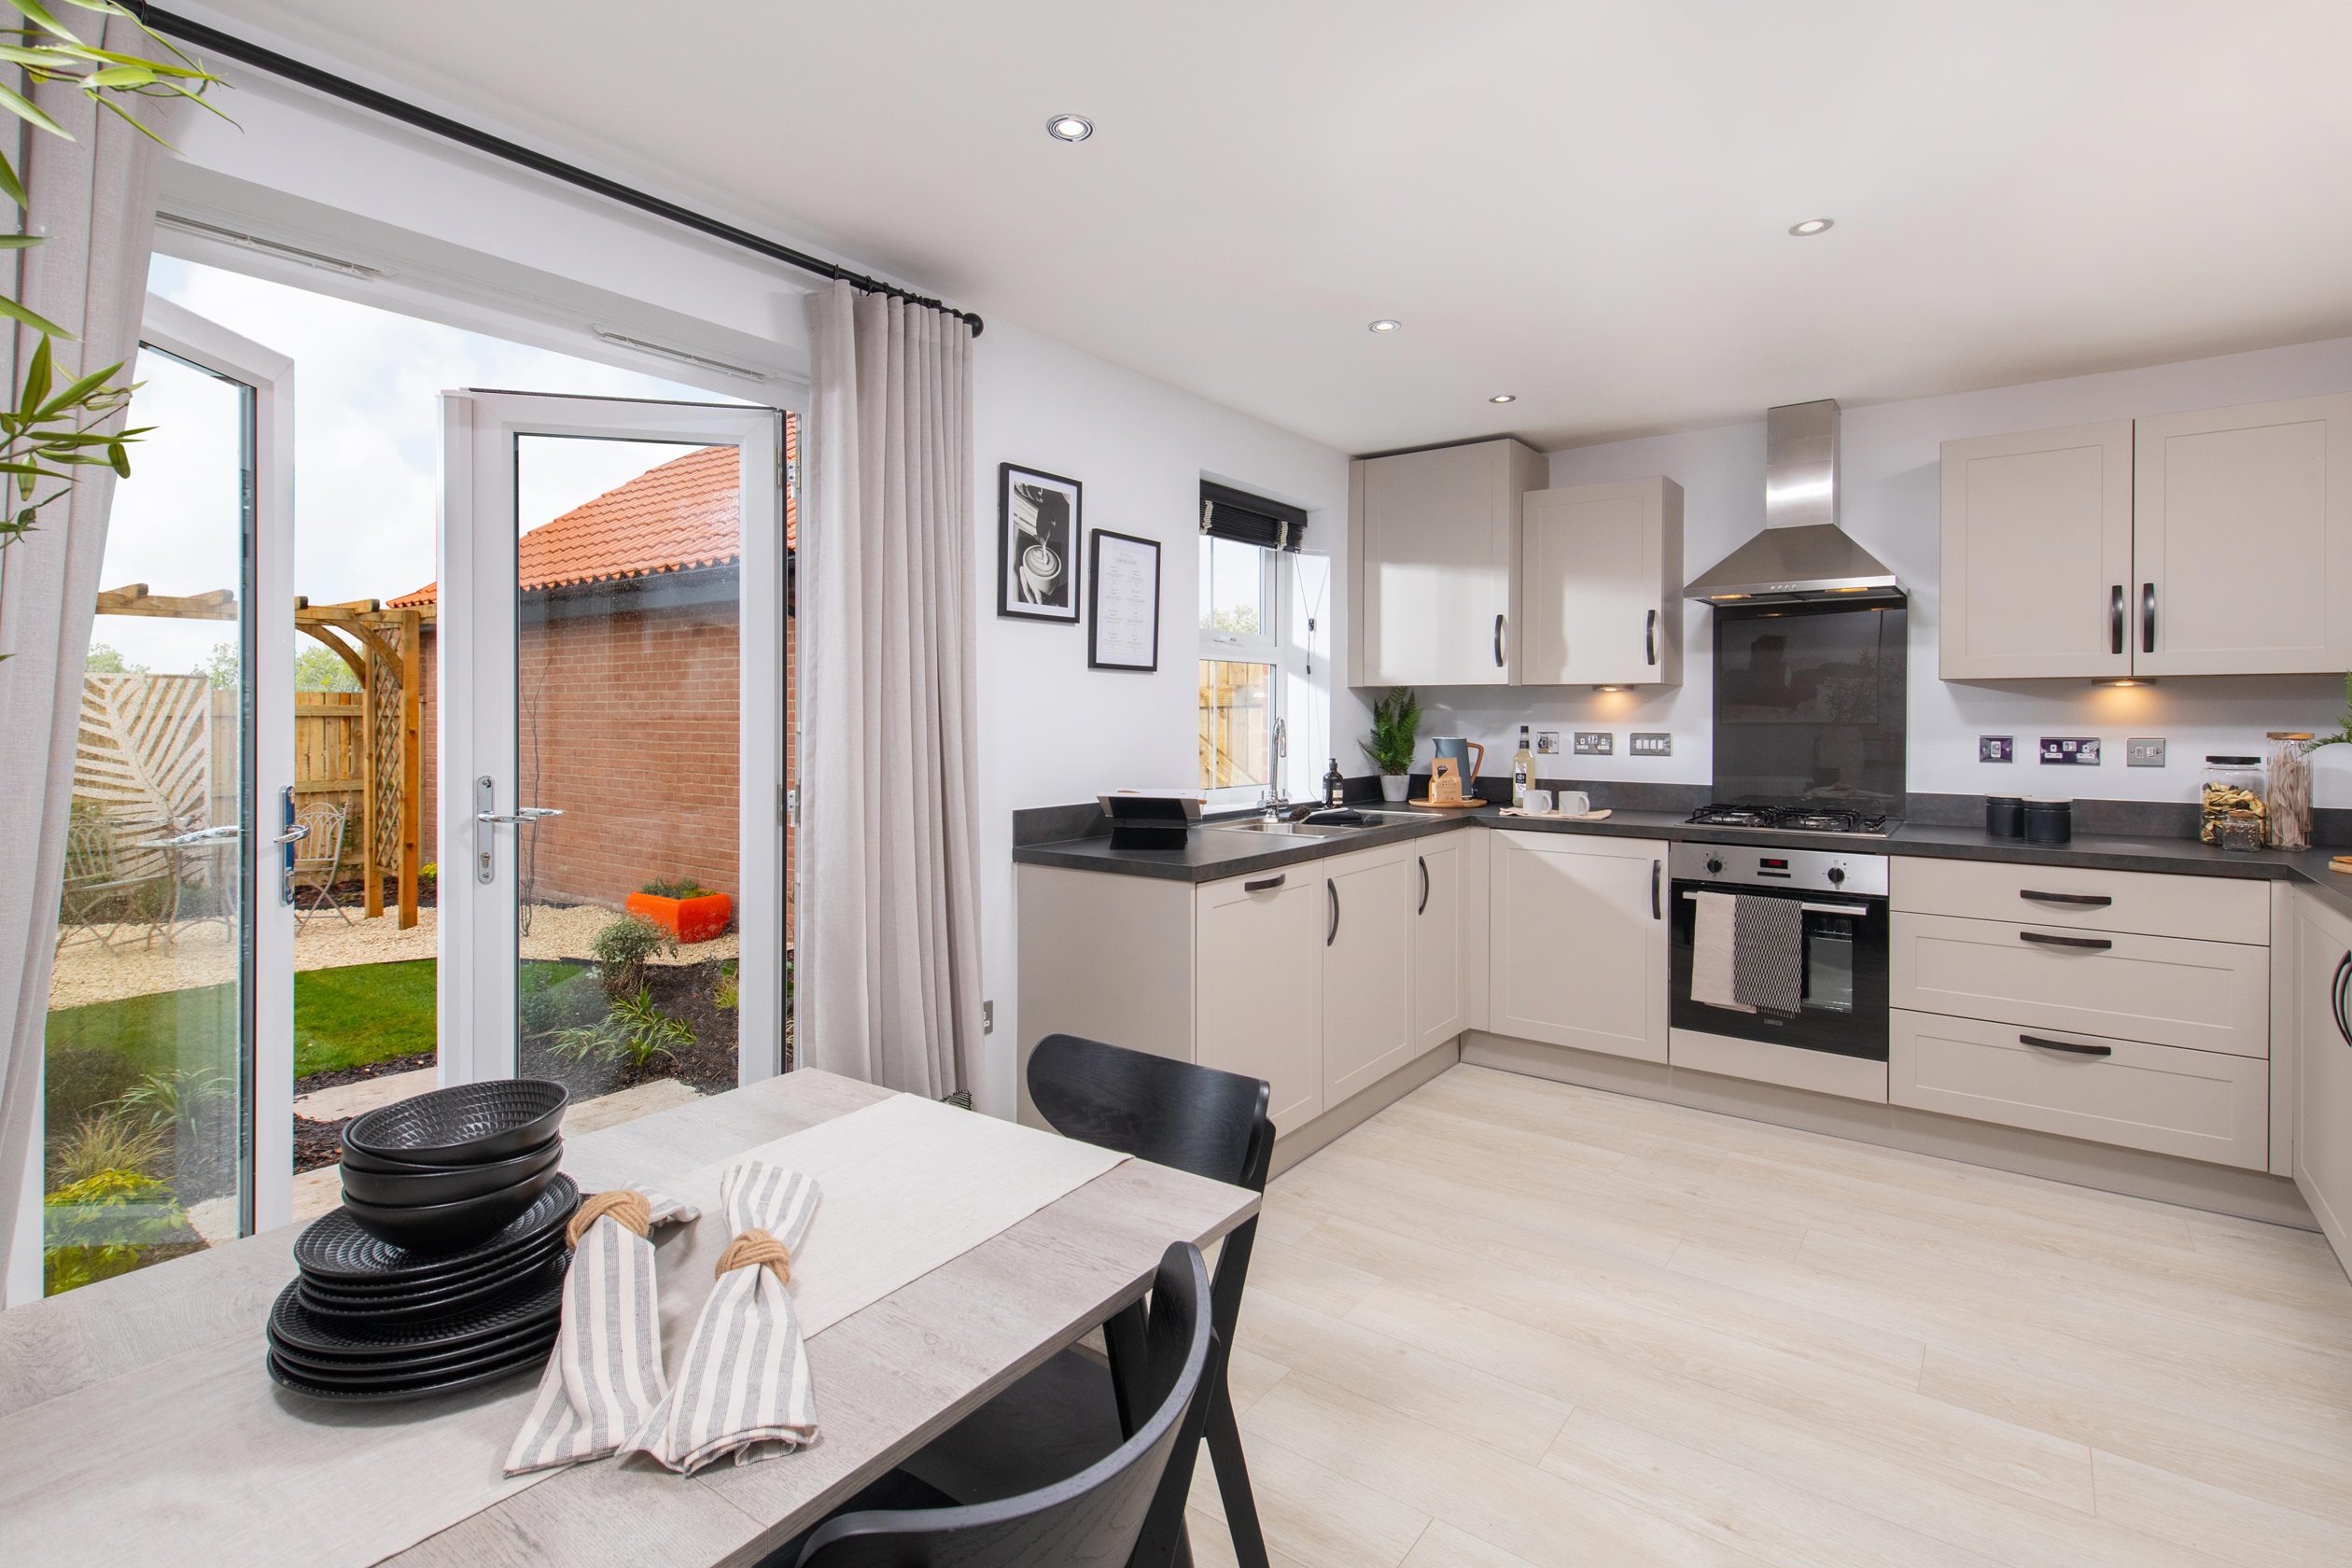 Property 2 of 7. The Archford Show Home